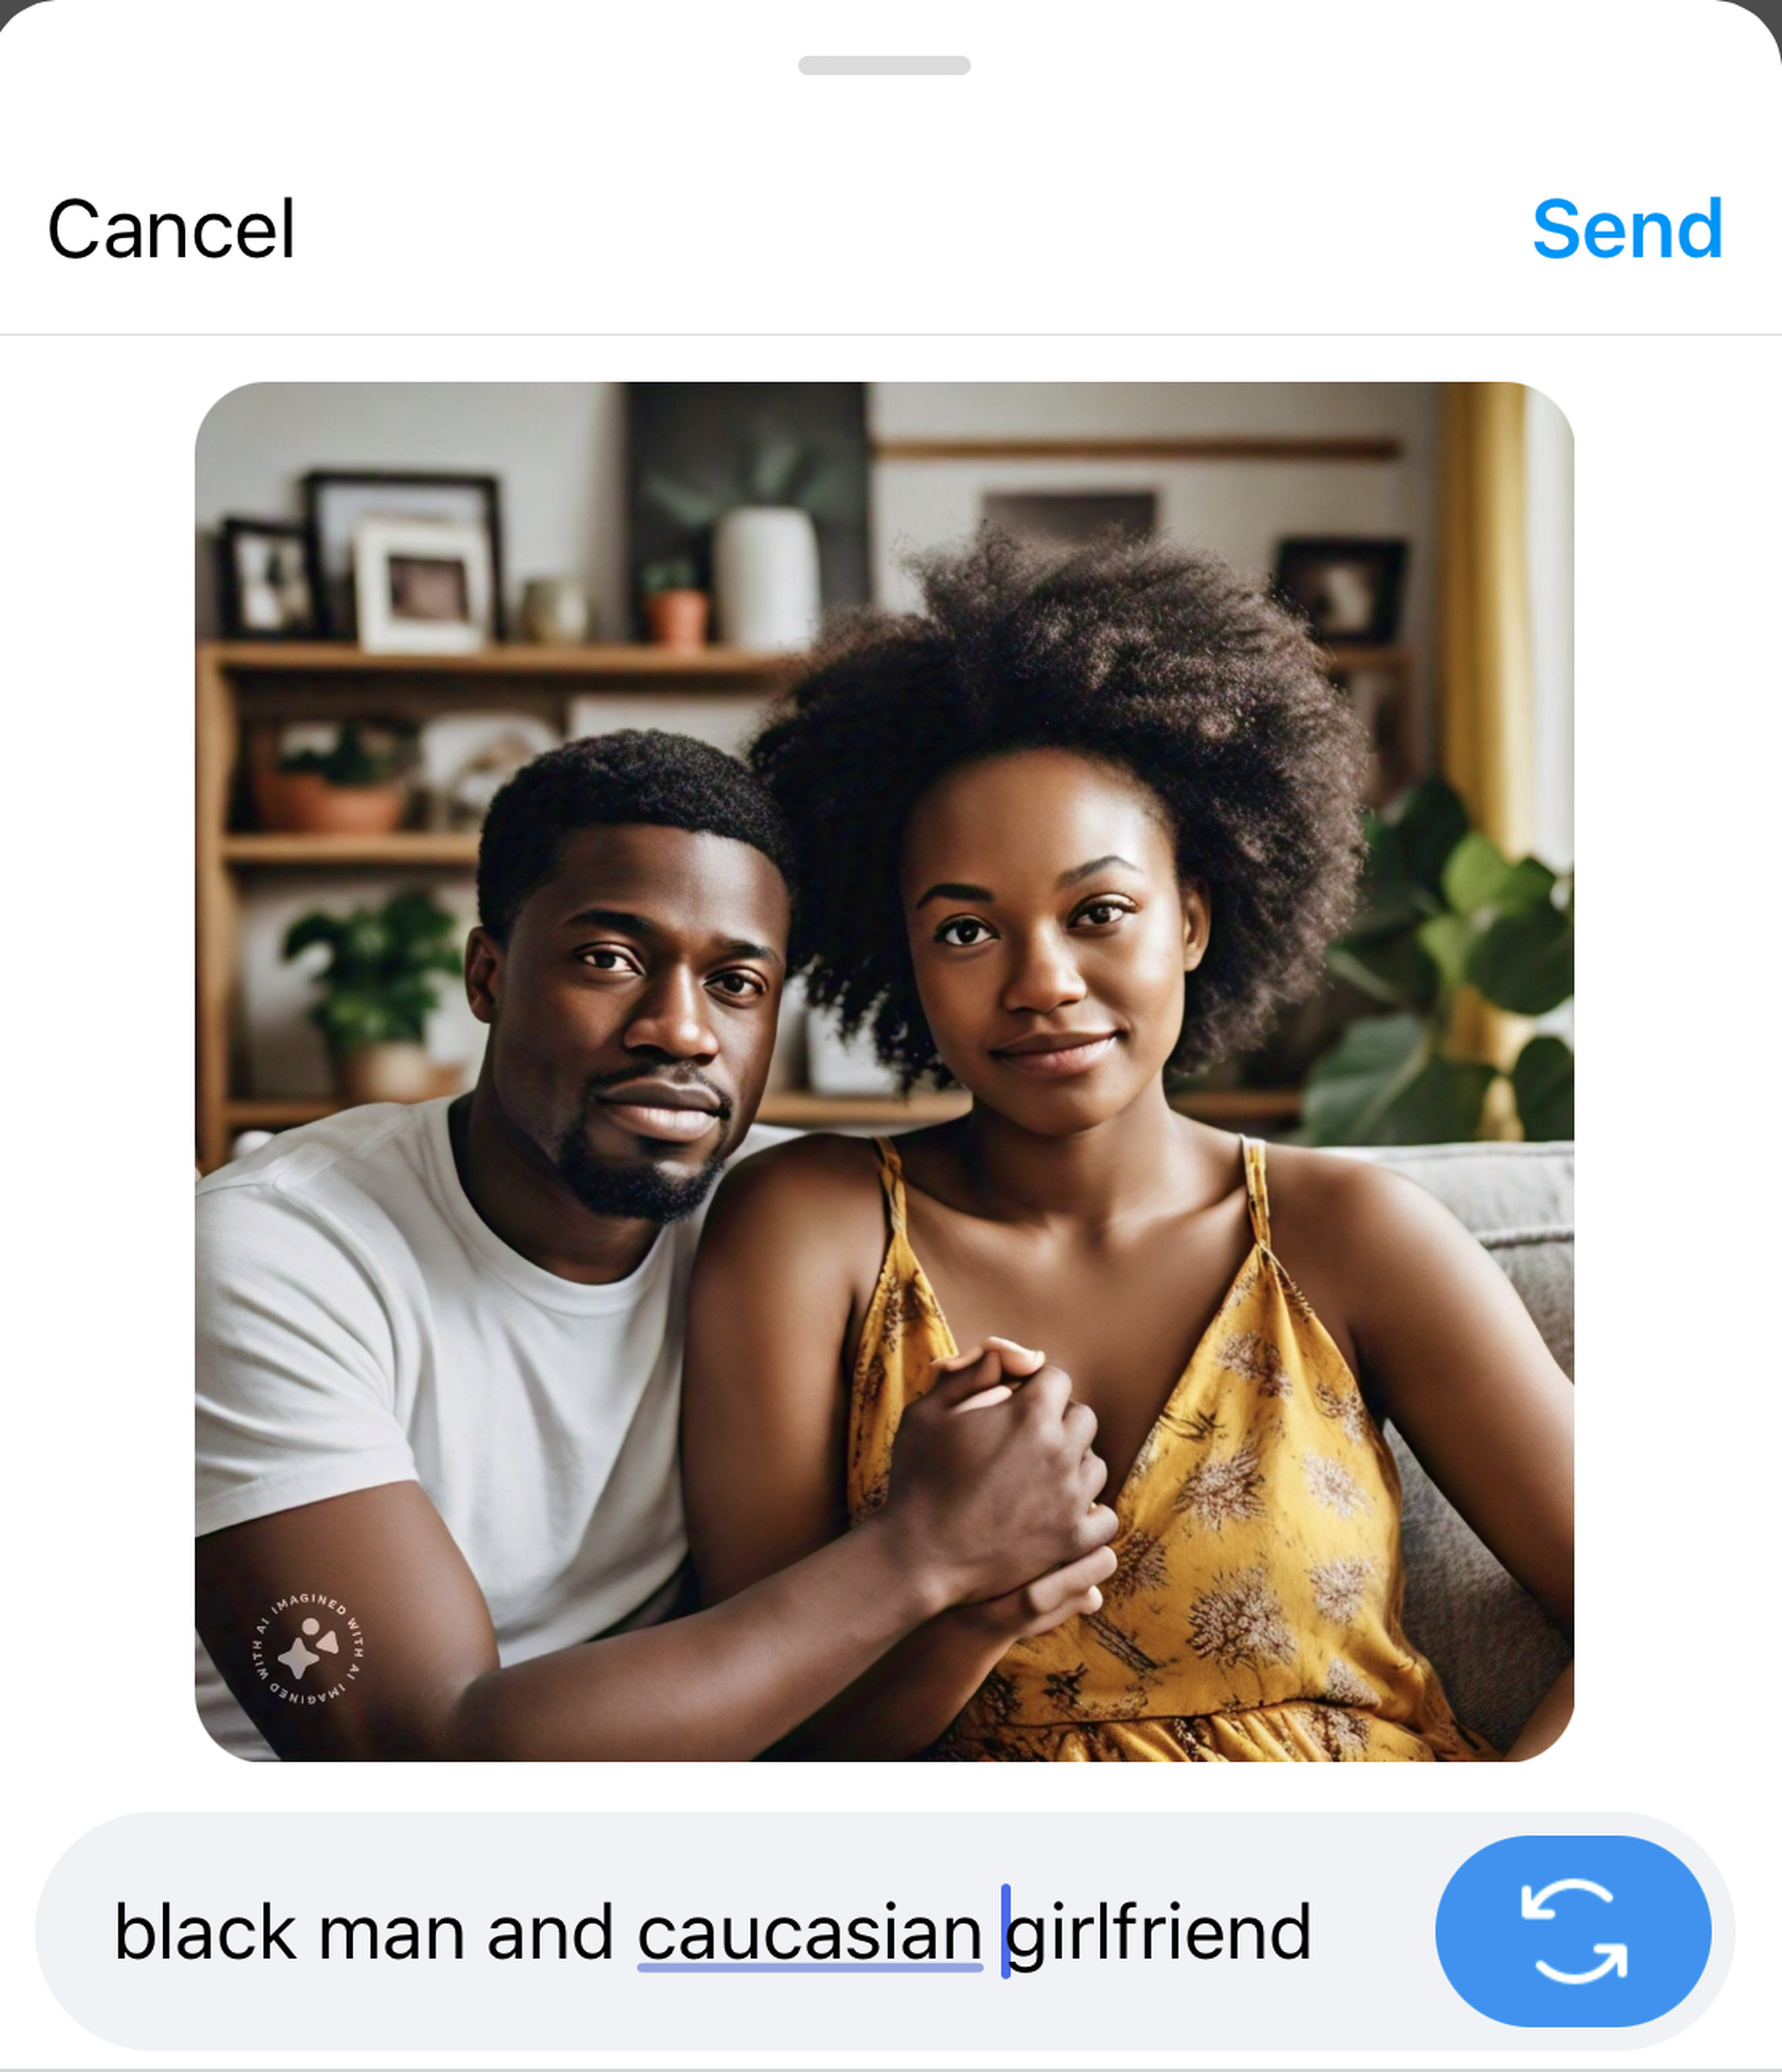 “Black man and caucasian girlfriend” AI prompt showing two Black people.